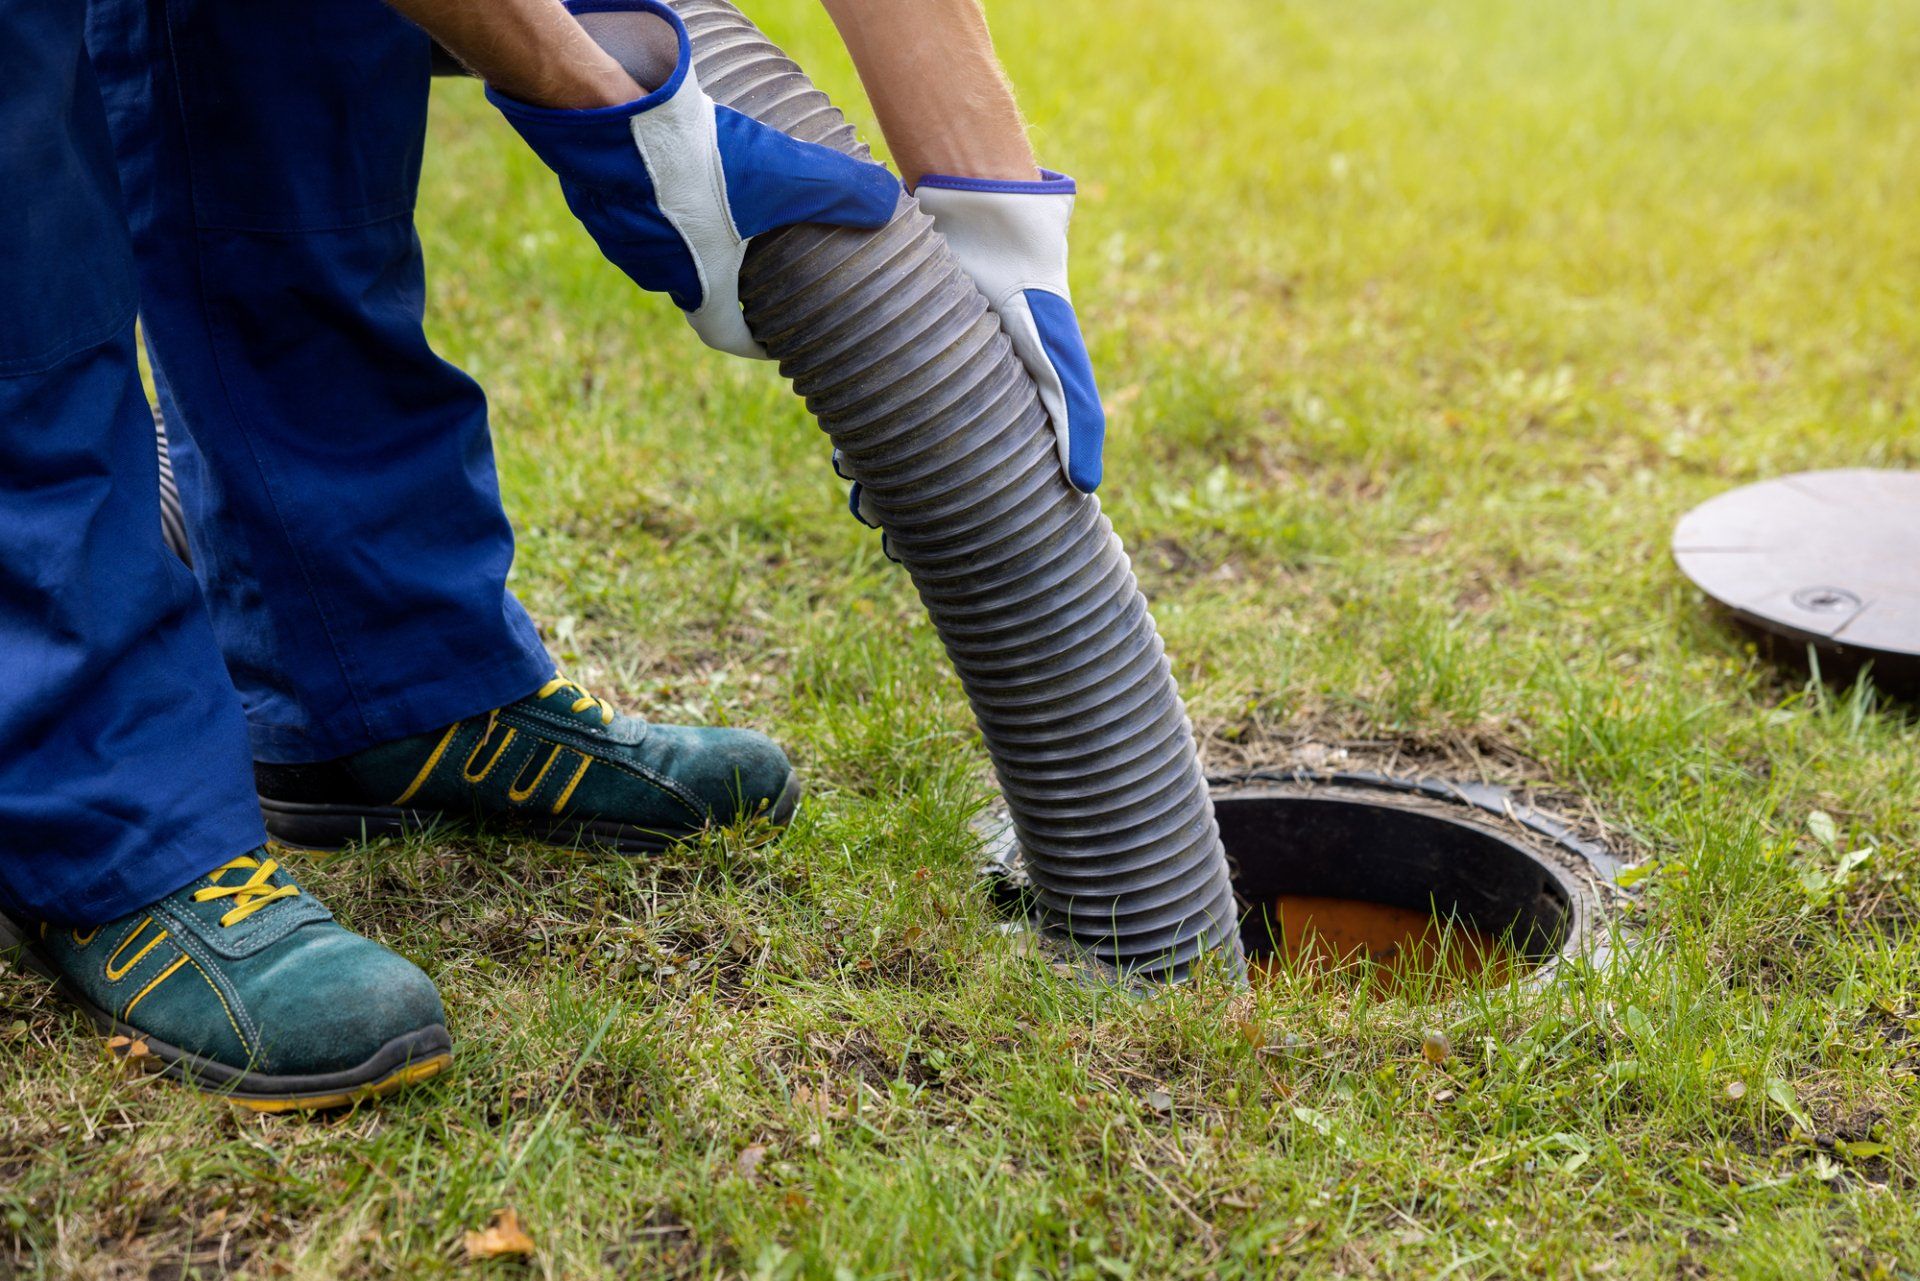 Emergency Septic Service in Hot Springs, AR | A-1 Pumping Service, LLC